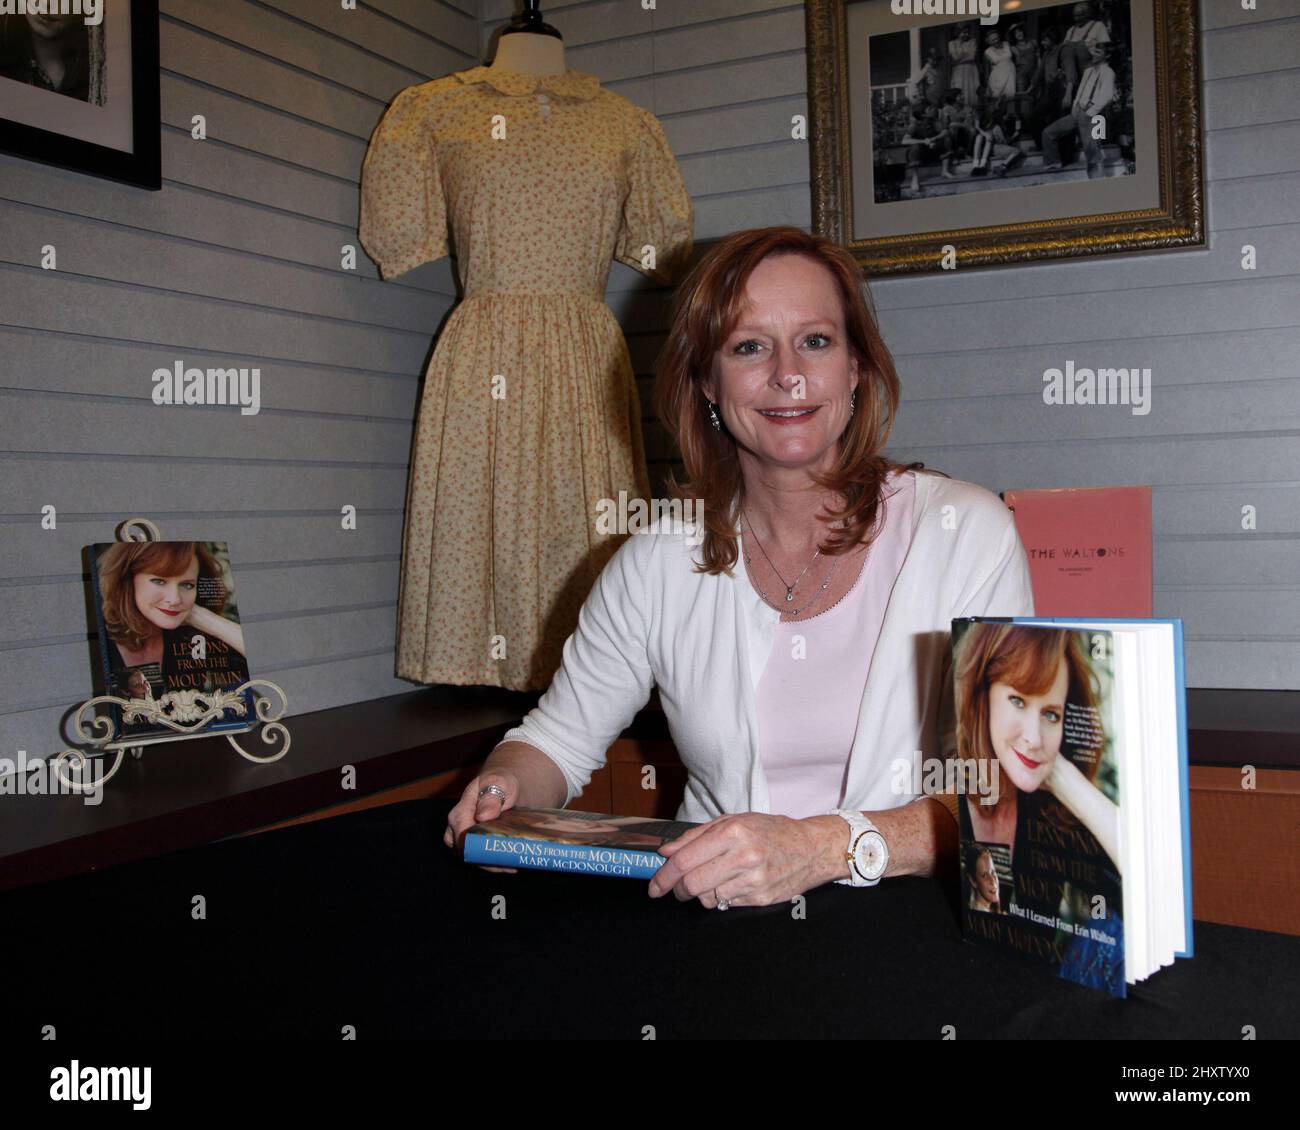 Mary McDonough signs copies of 'Lessons From the Mountain' held at the SGMA Museum at Dollywood in Tennessee, USA. Stock Photo